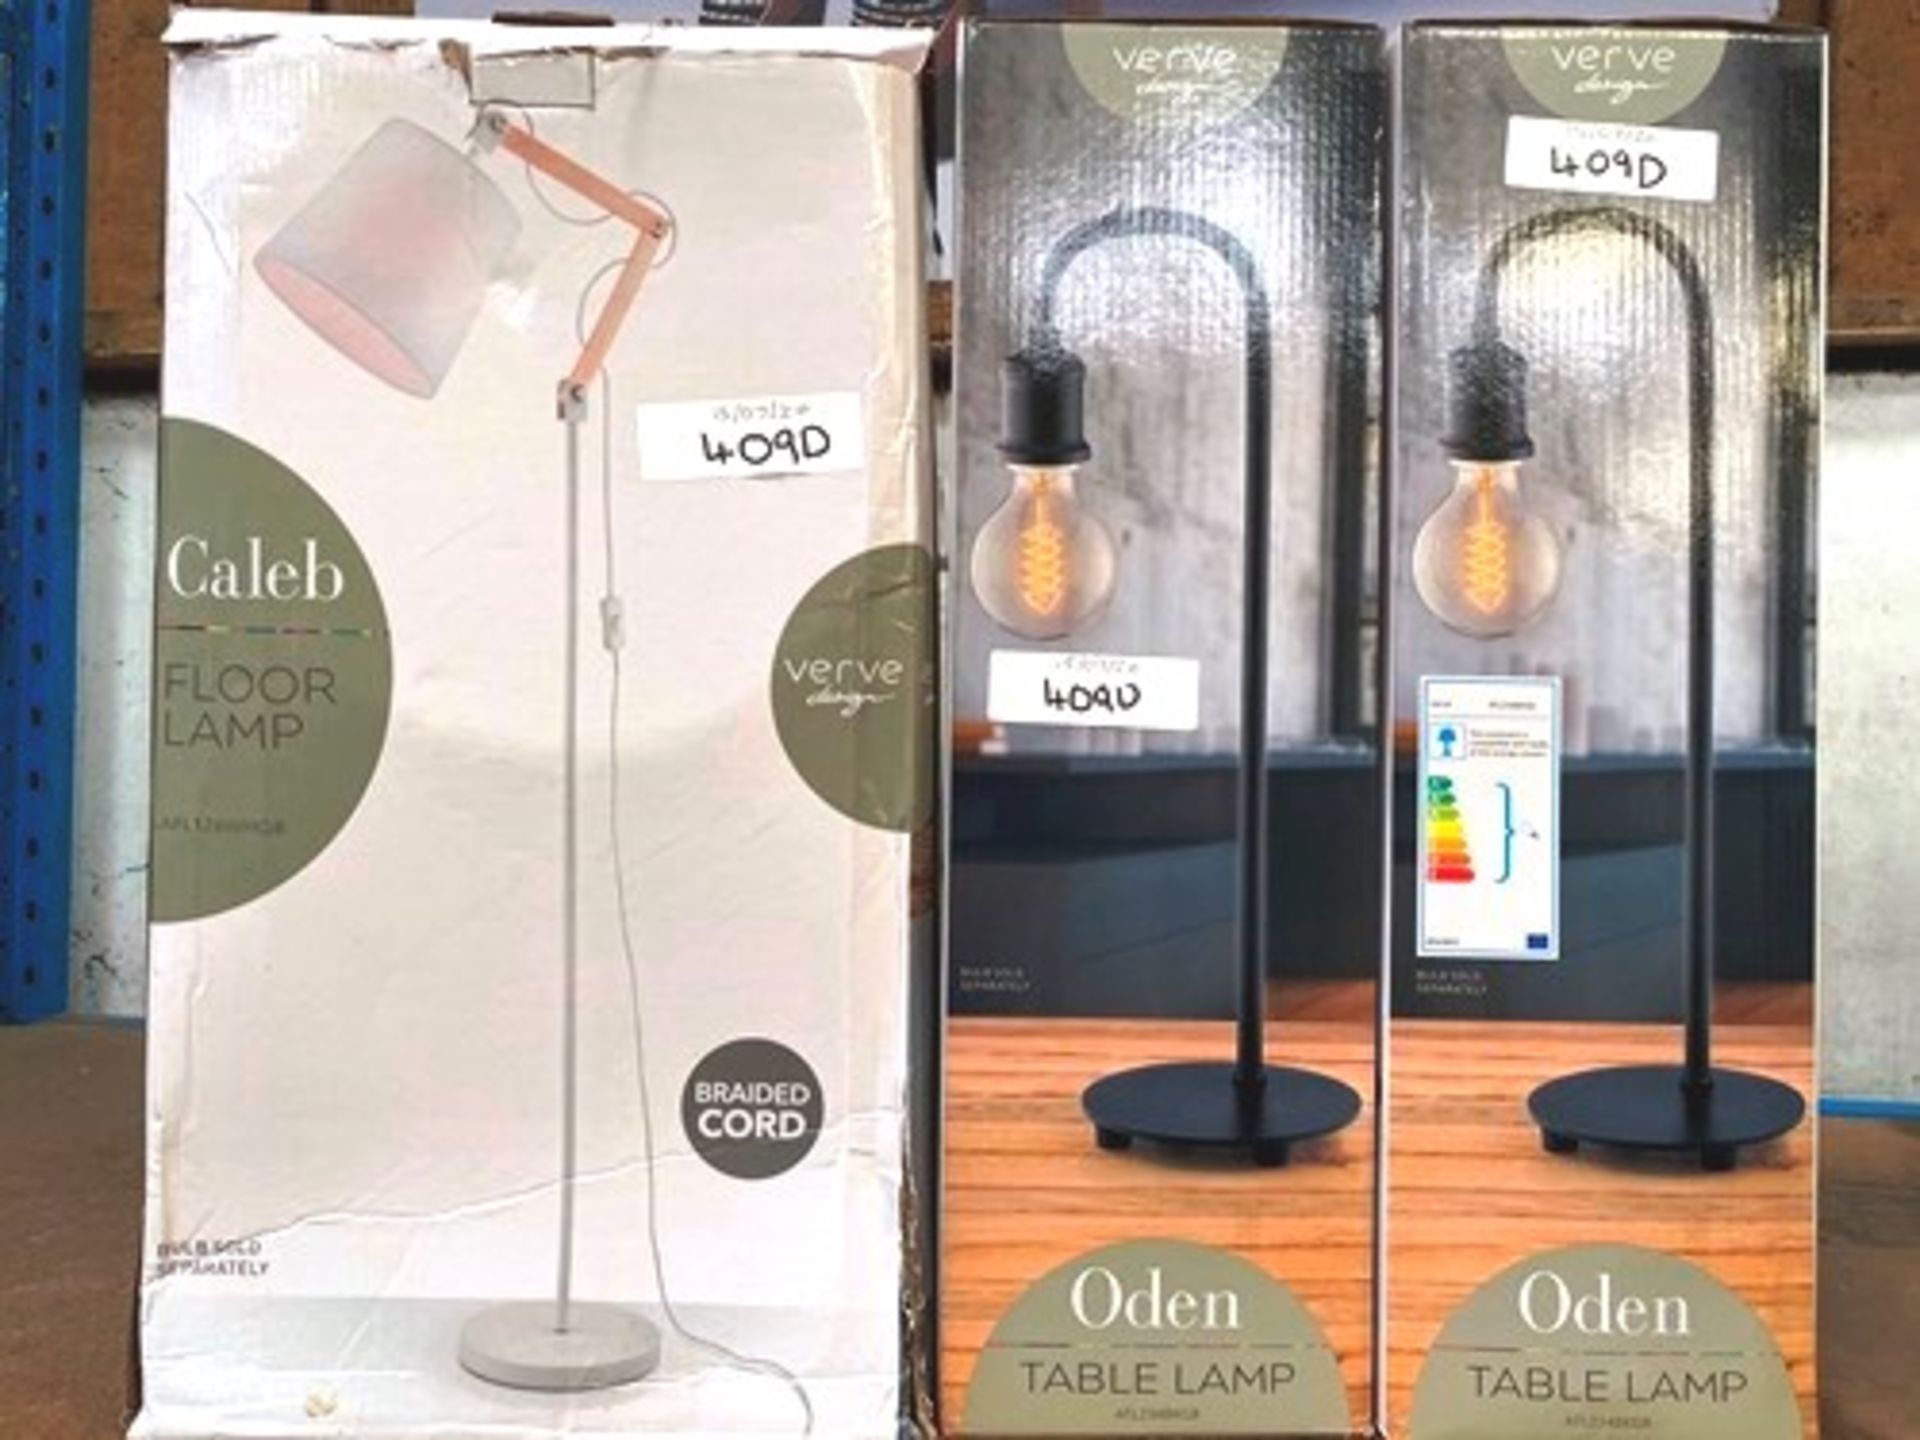 2 x Oden table lamps, 1 x Caleb floor lamp braided cord - New (GS29)